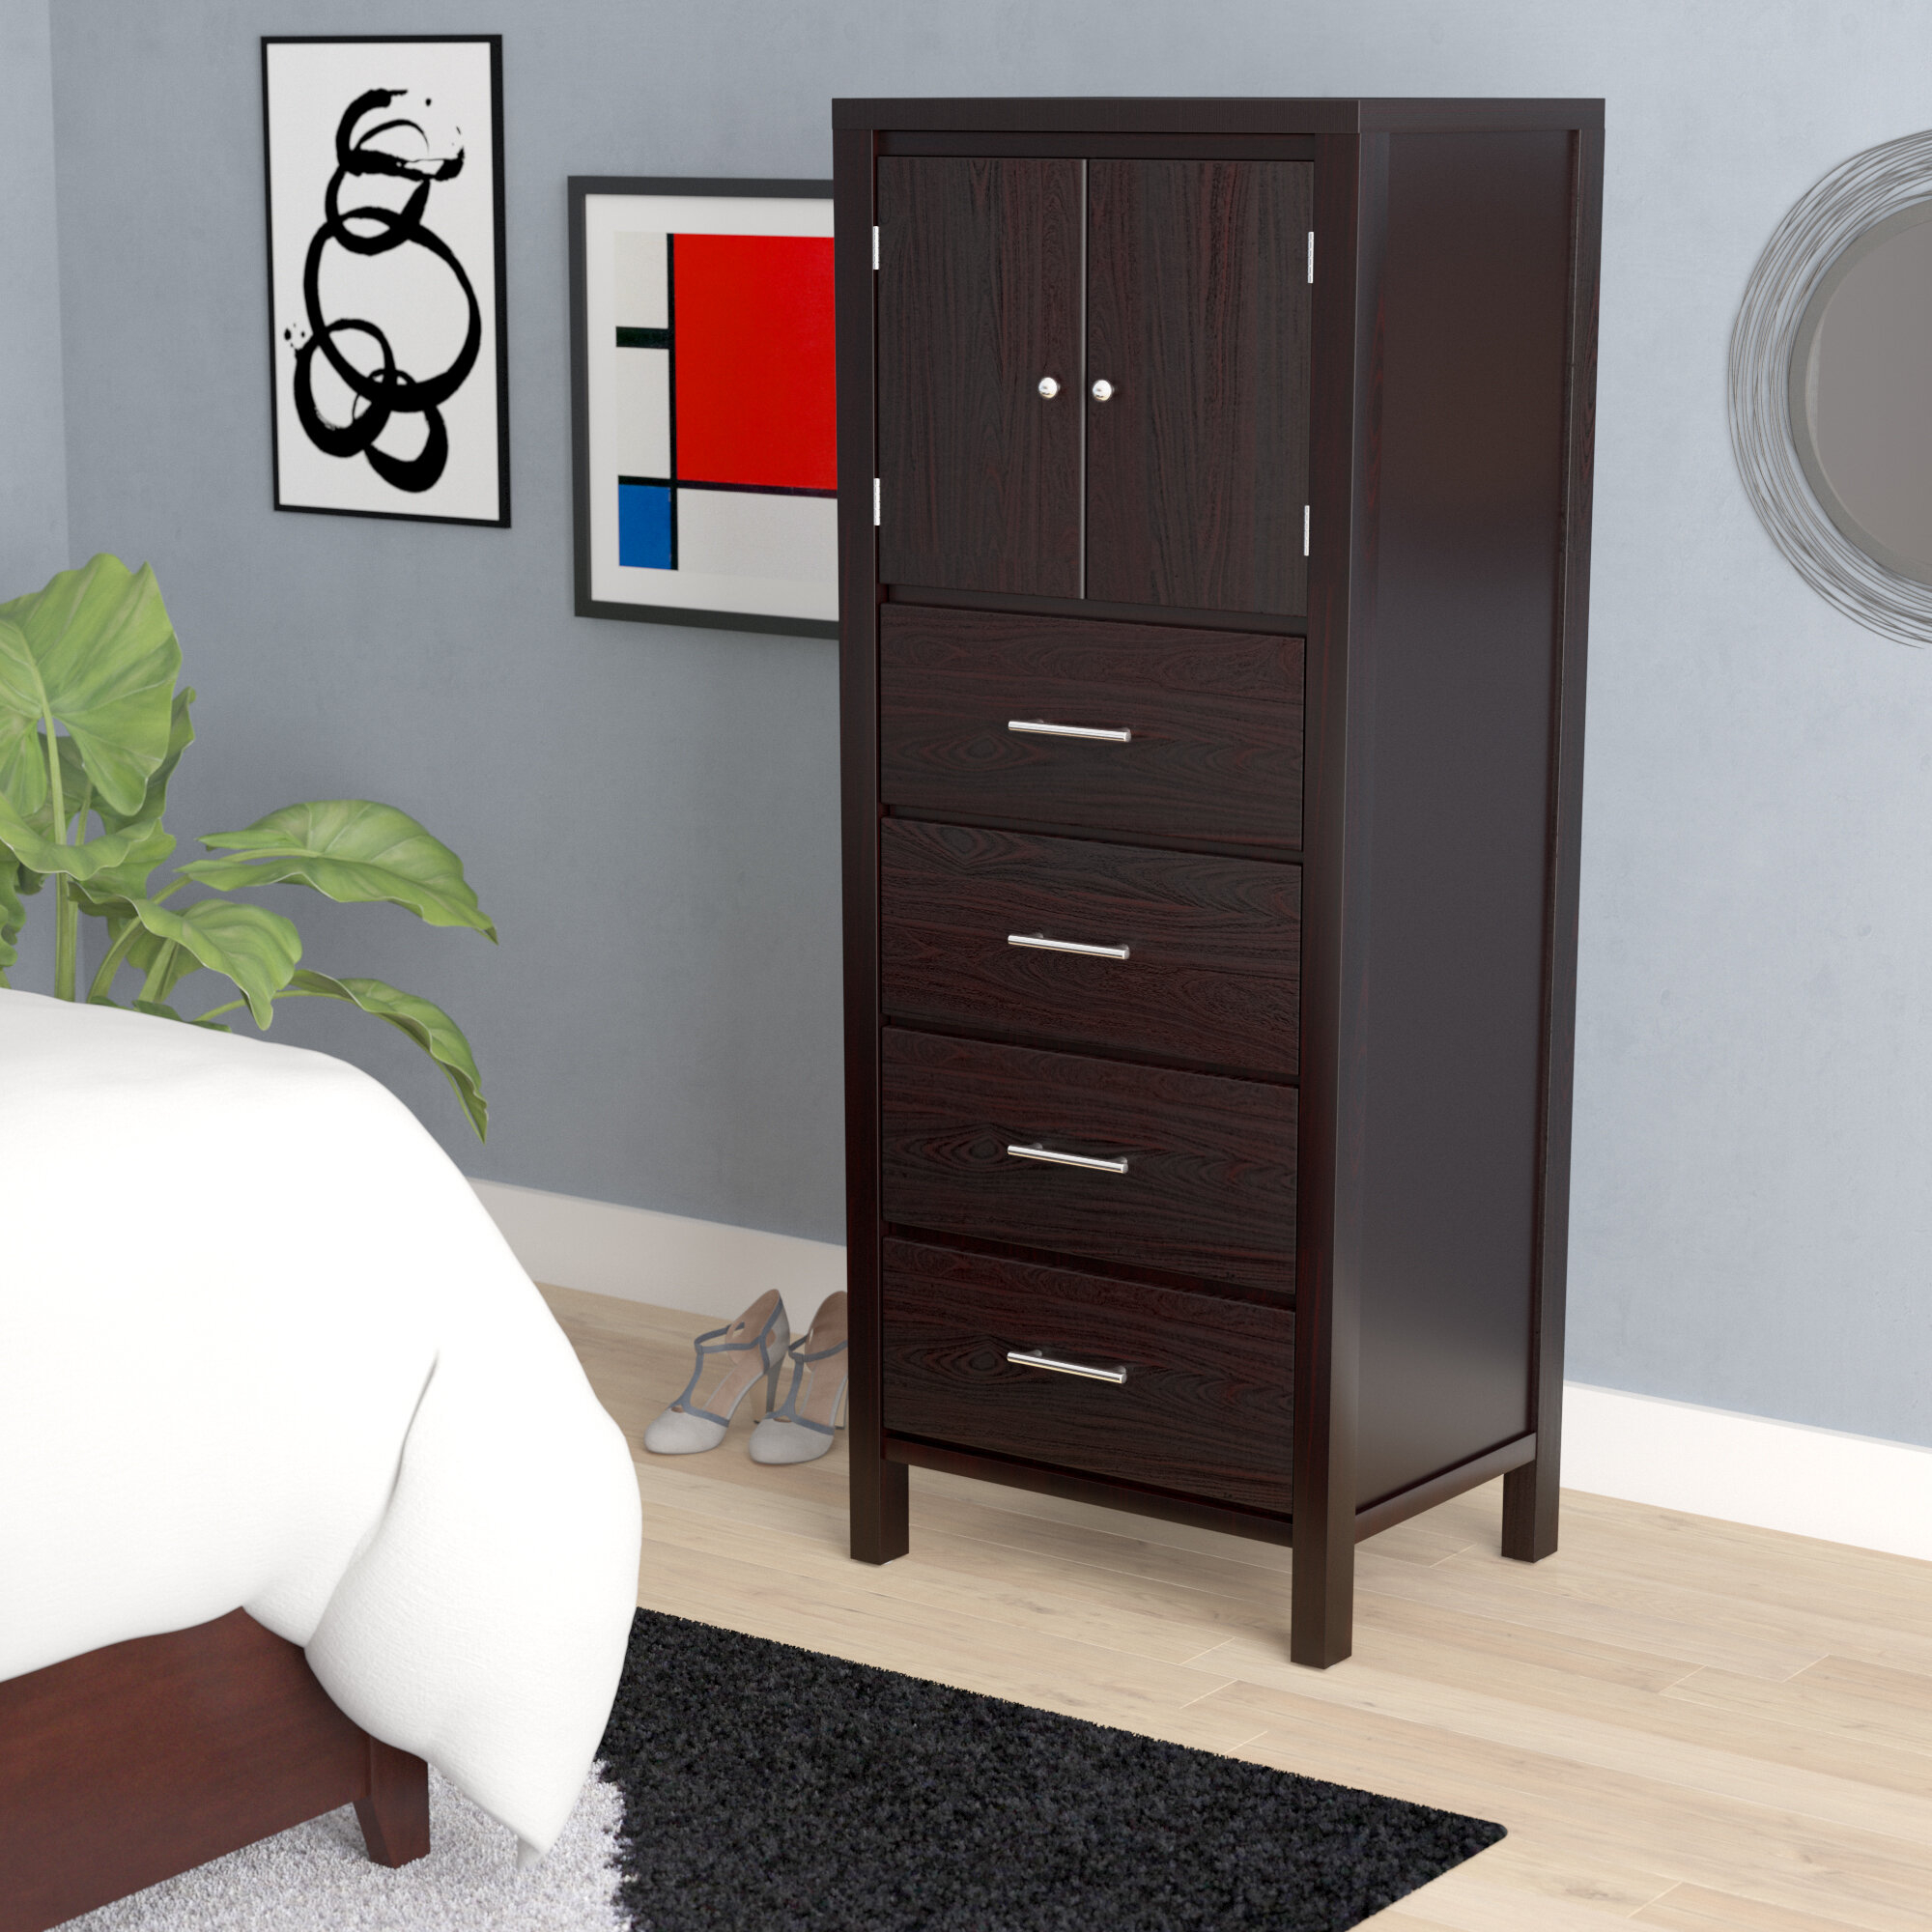 Narrow Chest Of Drawers Visualhunt, 52 Inch Width Dresser